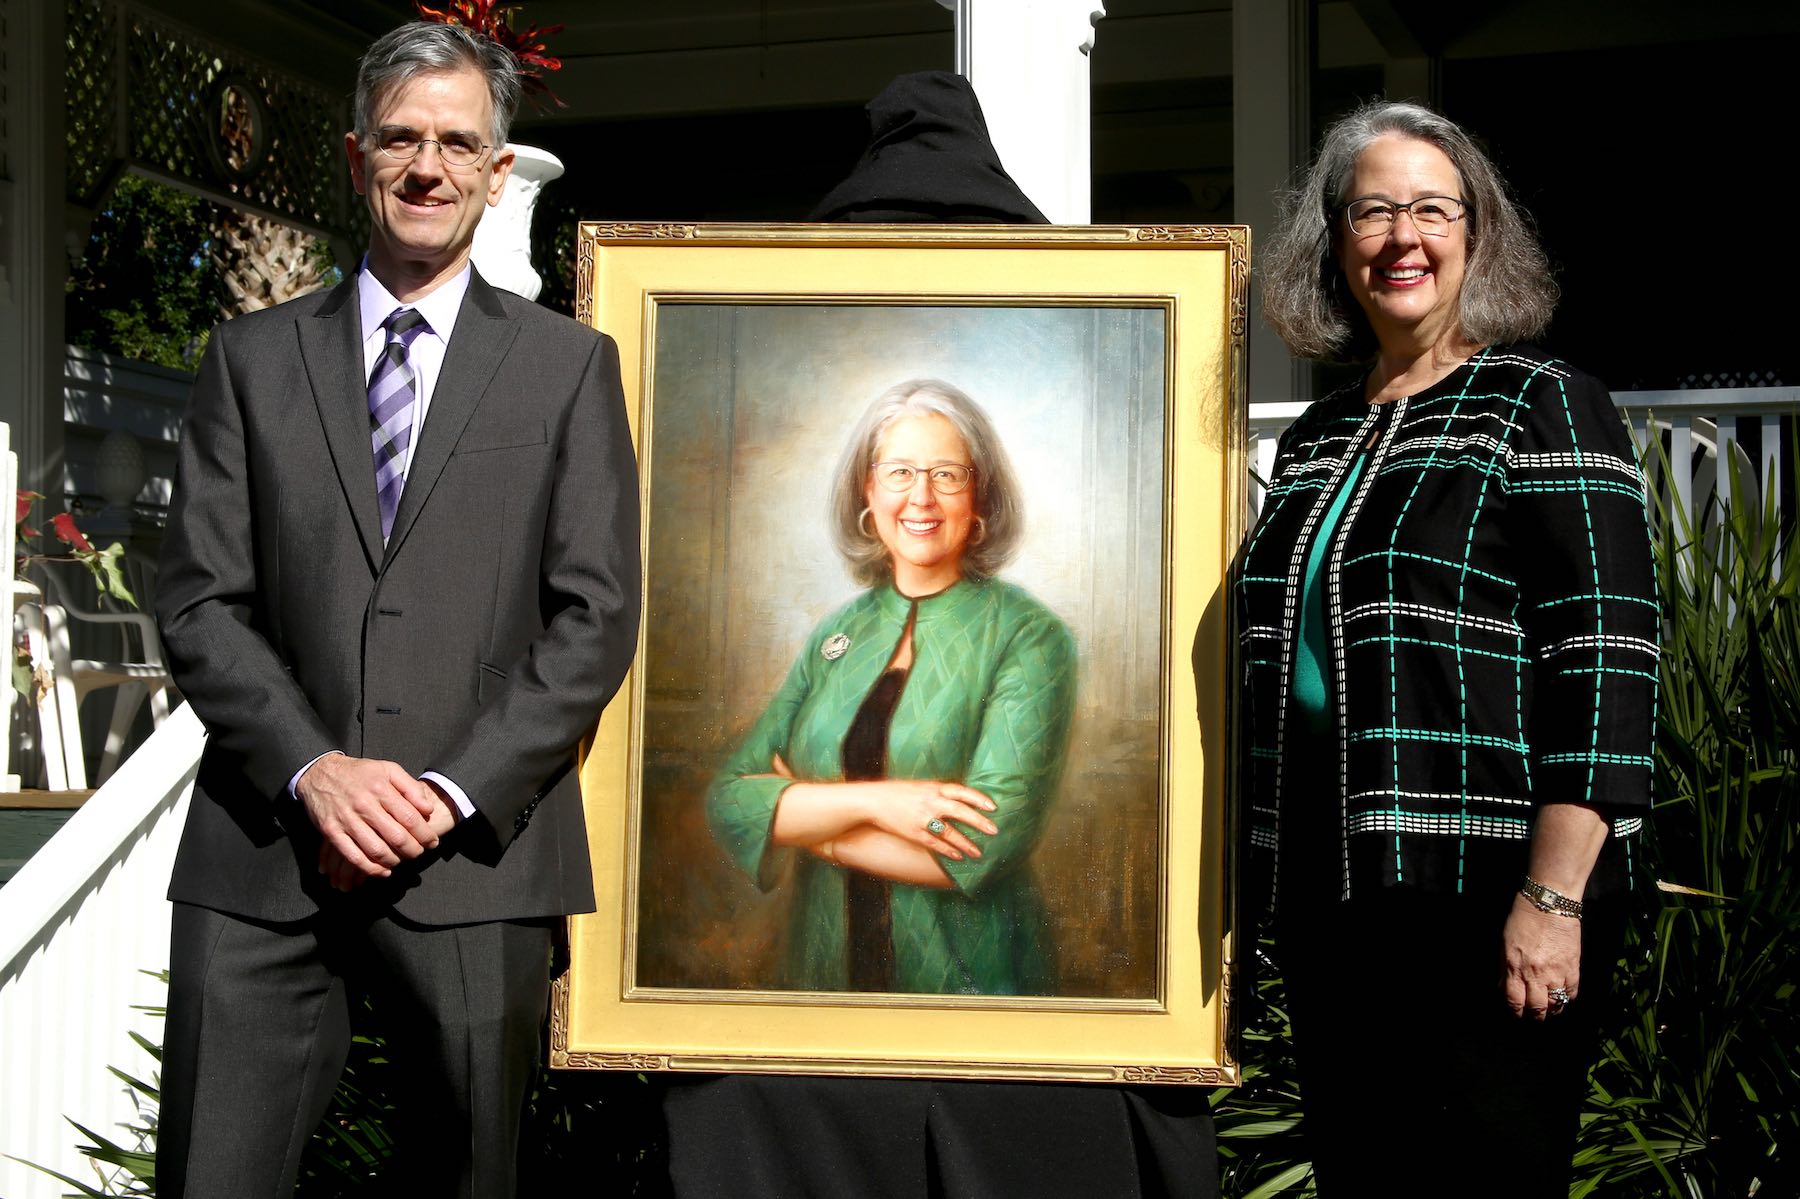 the two stand next to the painting